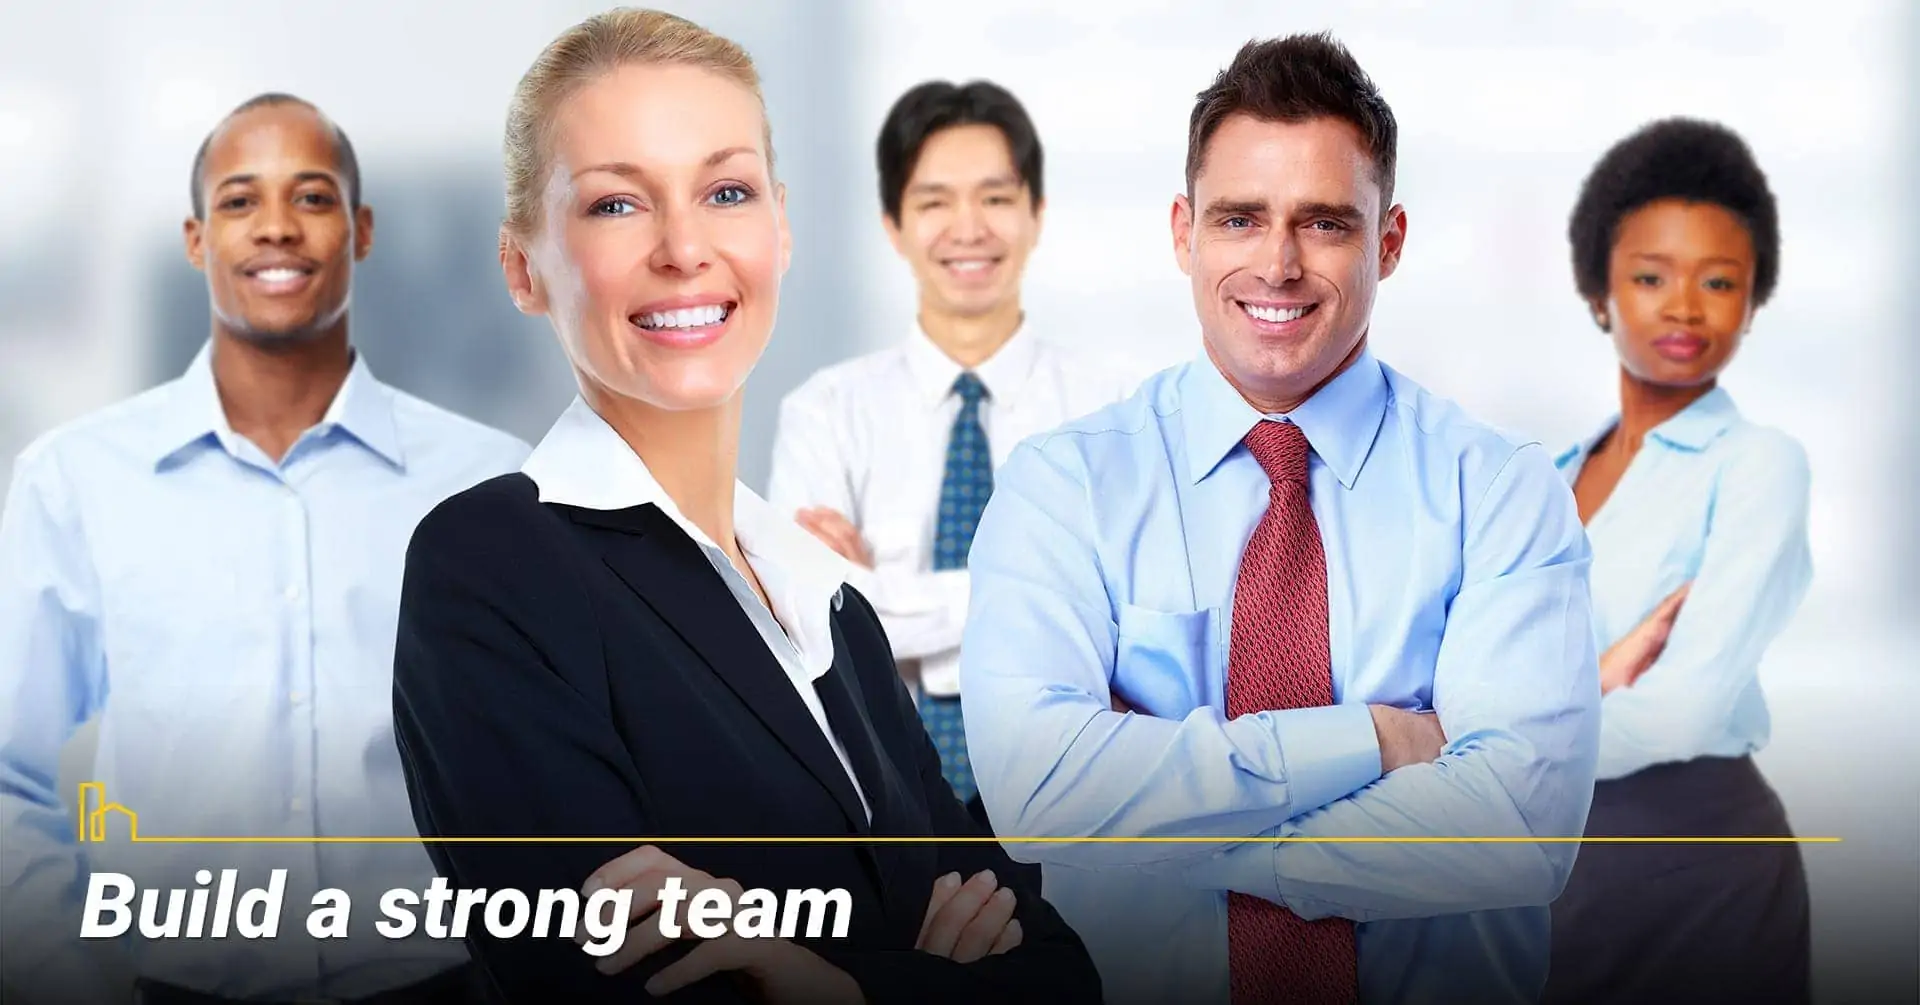 Build a strong team, work with smart people